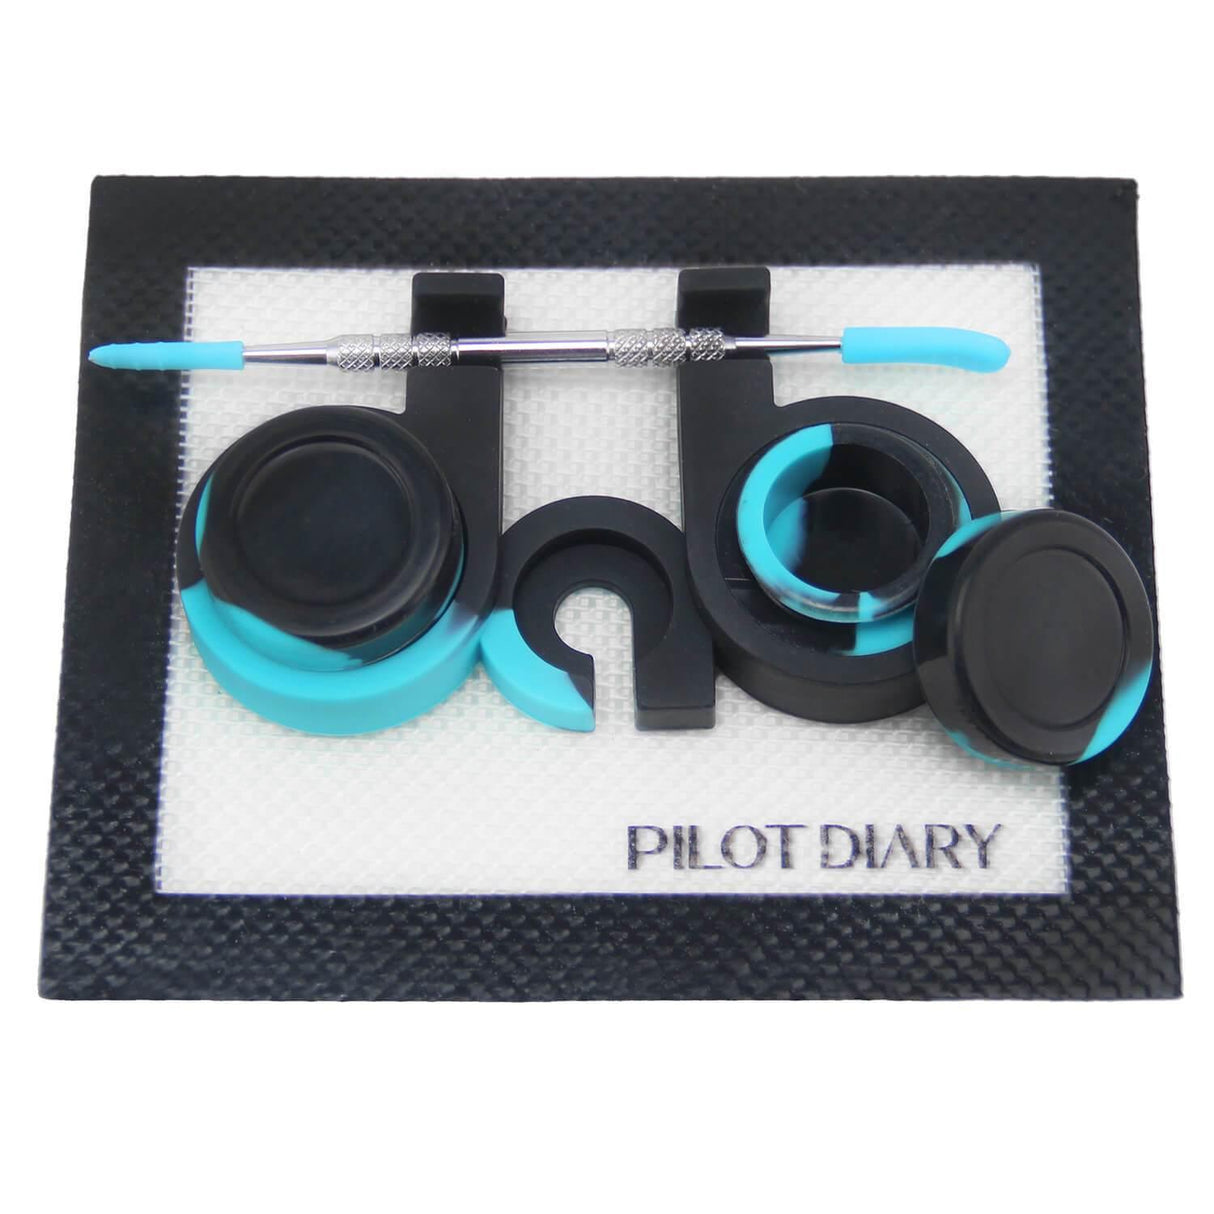 Pilot Diary Silicone Dab Straw Kit 6.5" with Stainless Steel Dabber, Front View on White Background